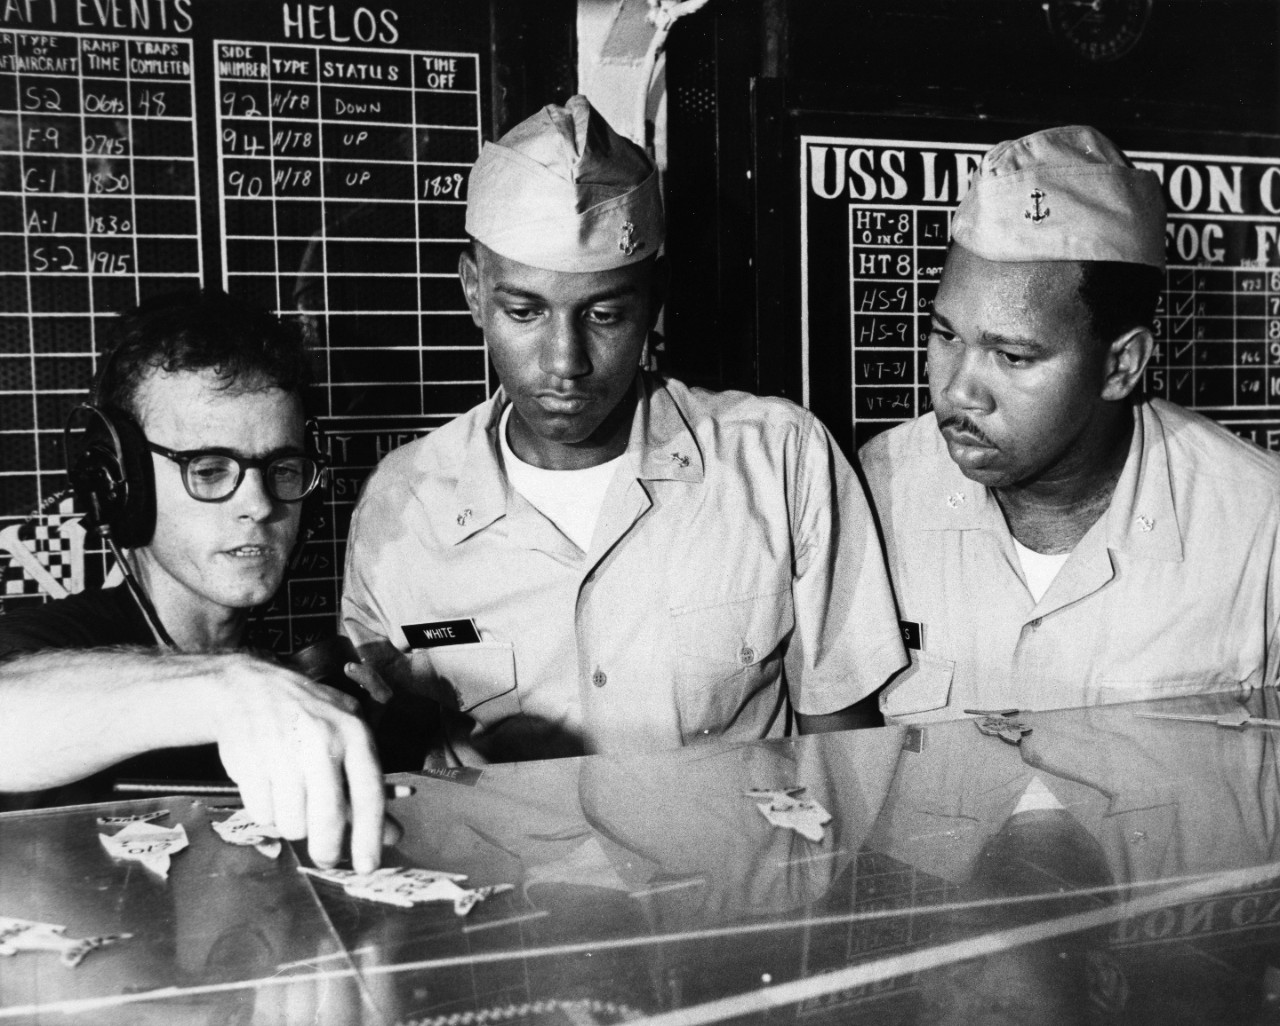 Naval Airman Daniel R. Highfill (left) explains flight deck operations to Midshipmen Charles E. White (center) and Robert E. Williams (right) aboard the aircraft carrier USS Lexington (CVS-16) in the Gulf of Mexico. The midshipmen were part of a ...